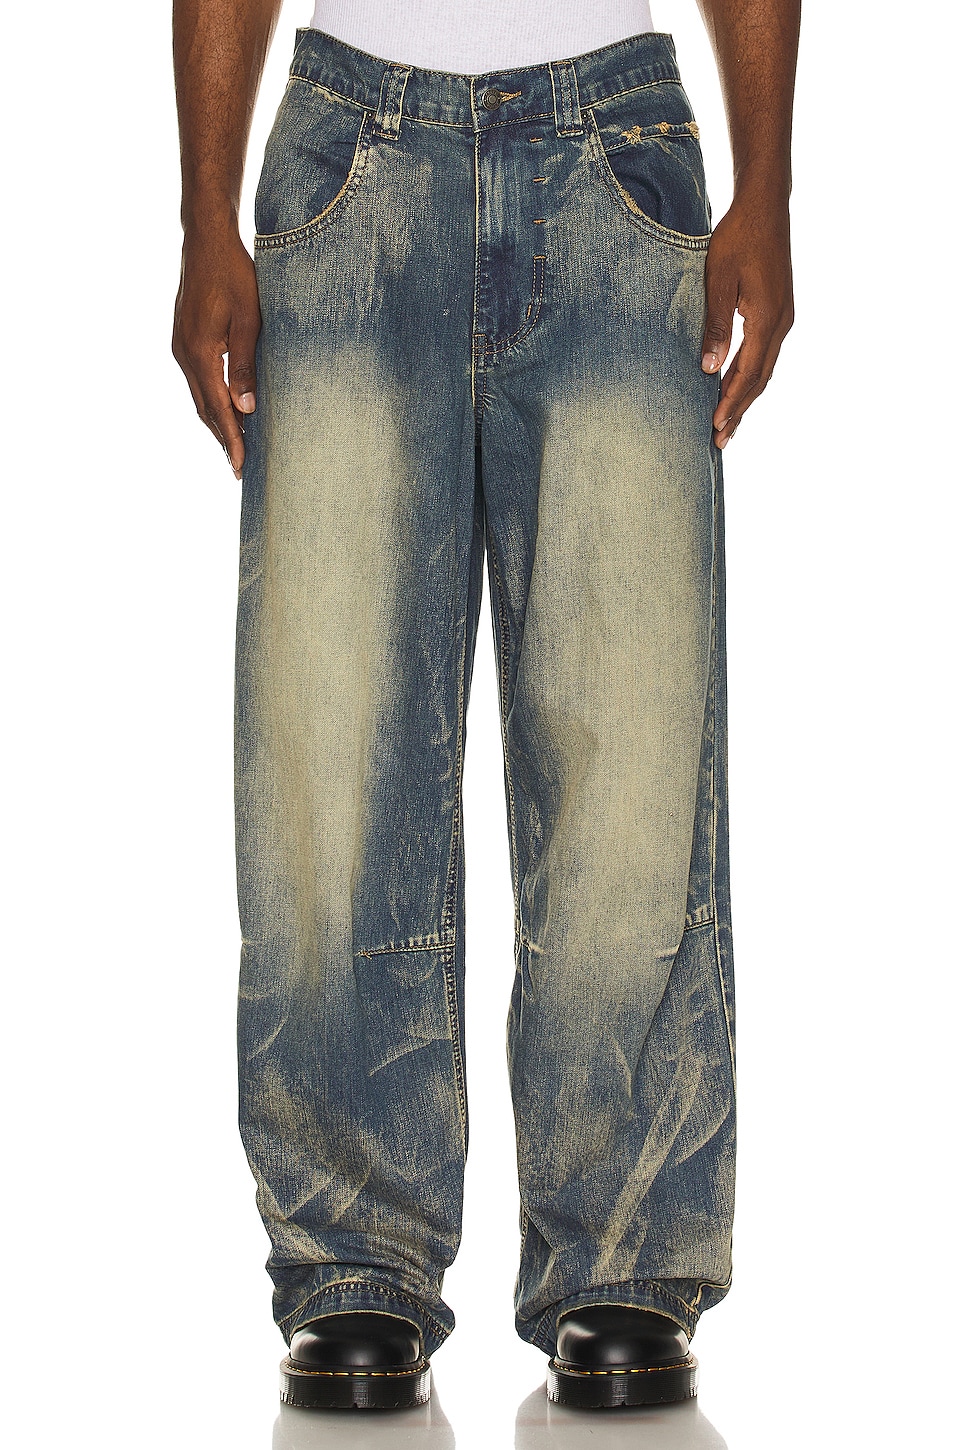 Jaded London Wing Print Studded Lowrise Colossus Jeans in Blue